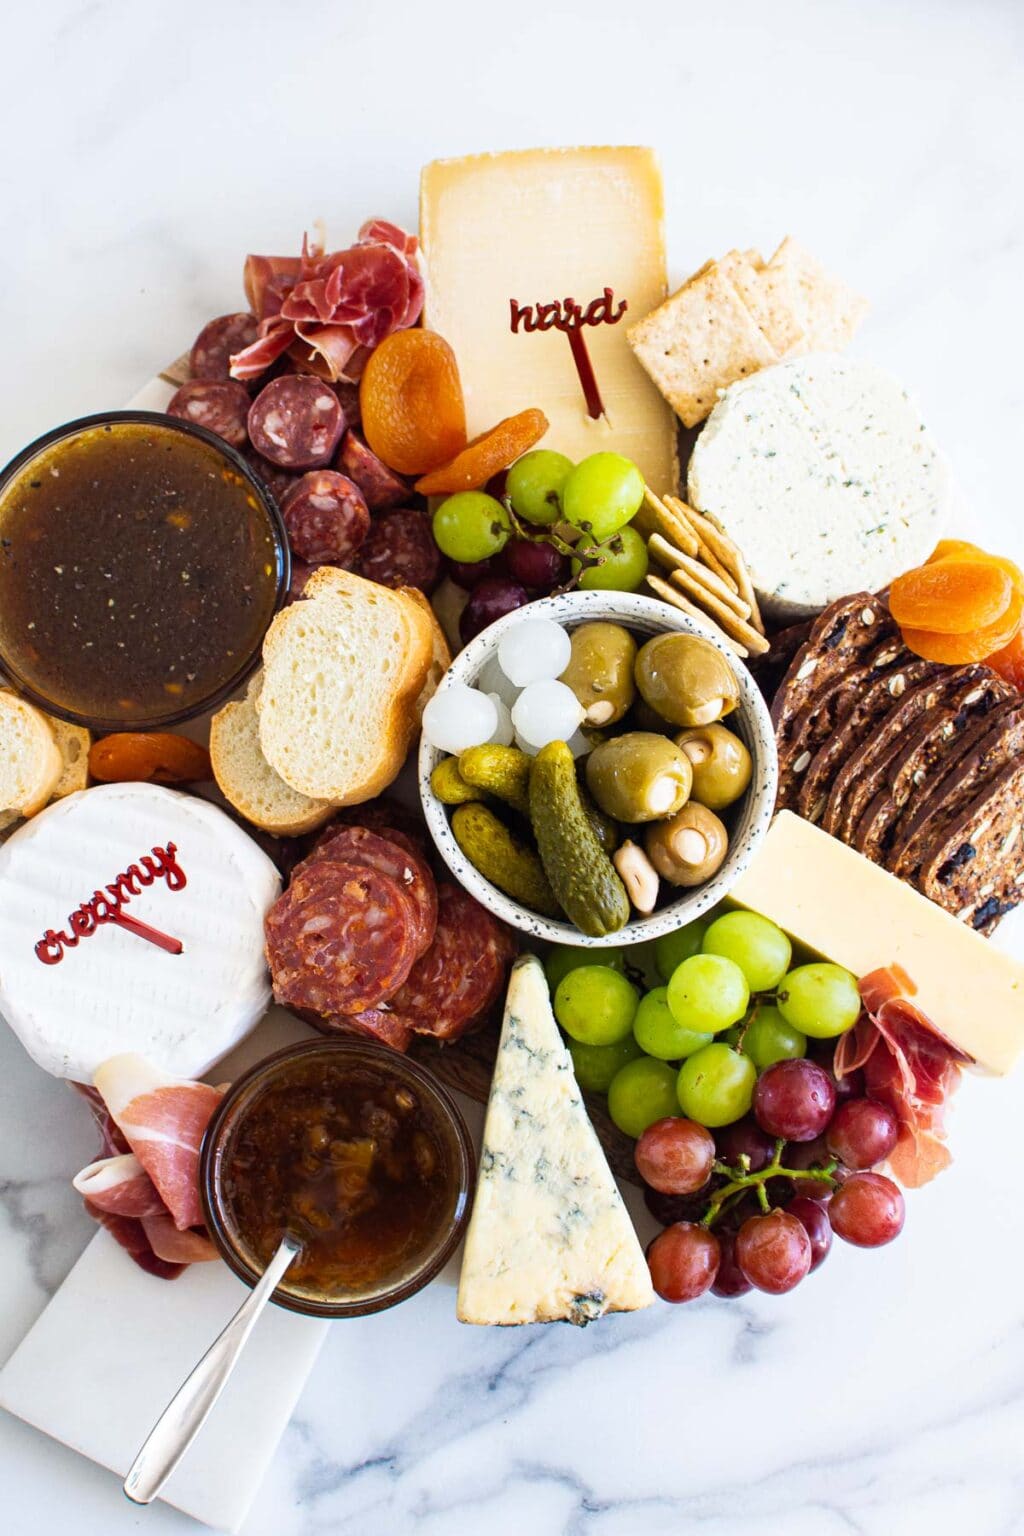 5 Best Charcuterie Board Ideas Simple and Easy! - iFOODreal.com